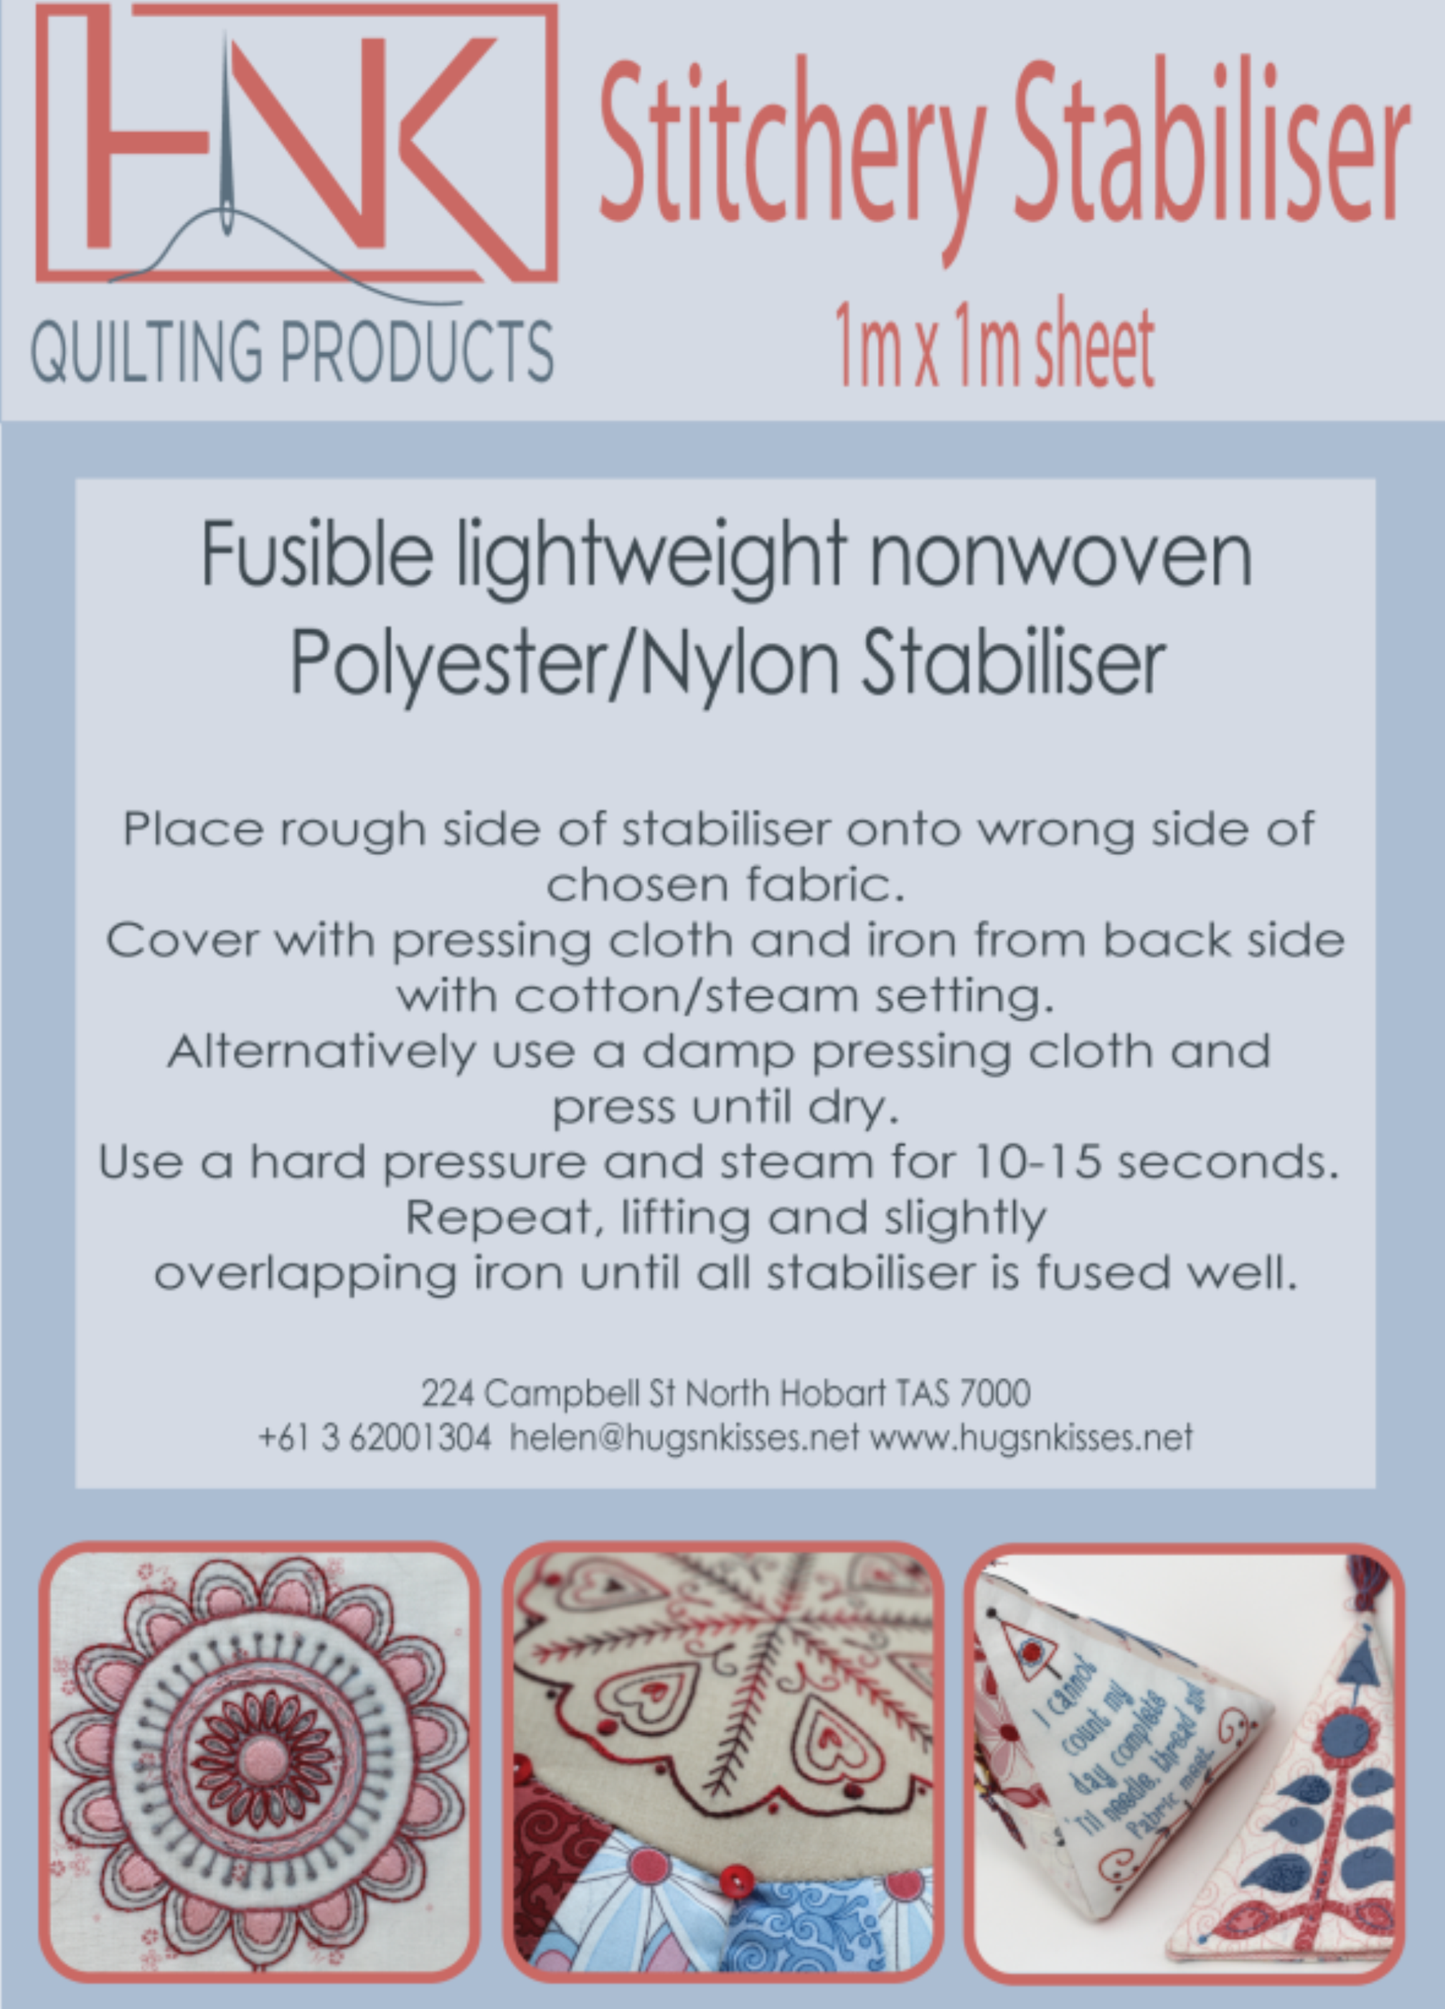 Embroidery stitchery stabiliser fusible non-woven 1 metre pack - Hugs n Kisses